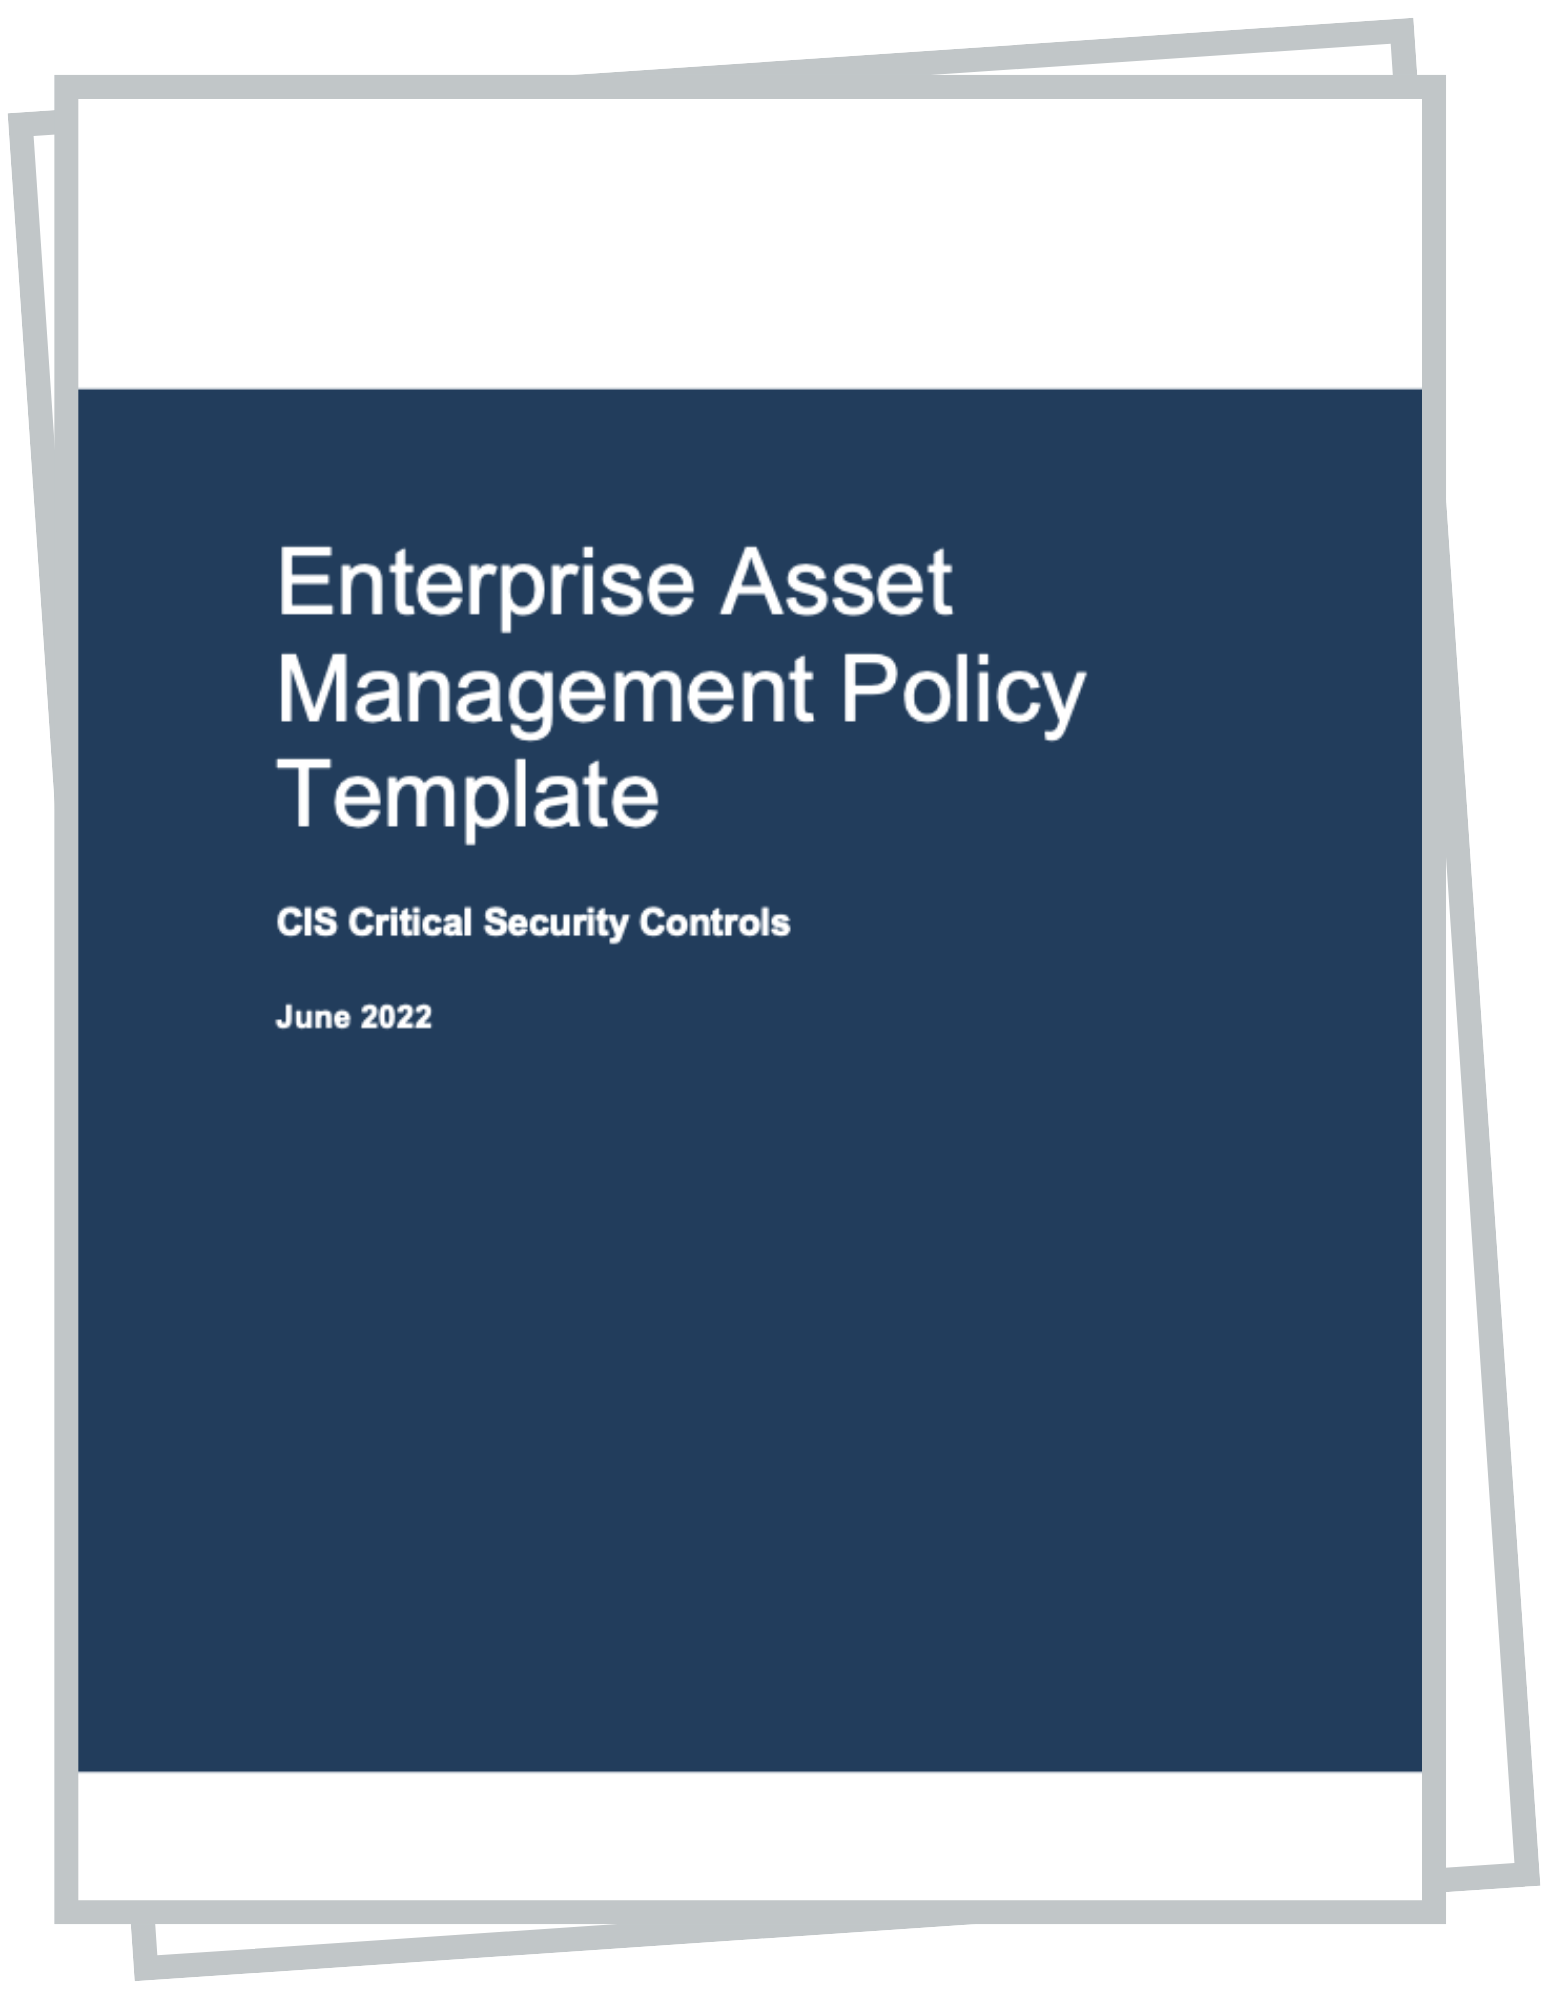 Enterprise Asset Management Policy Template cover